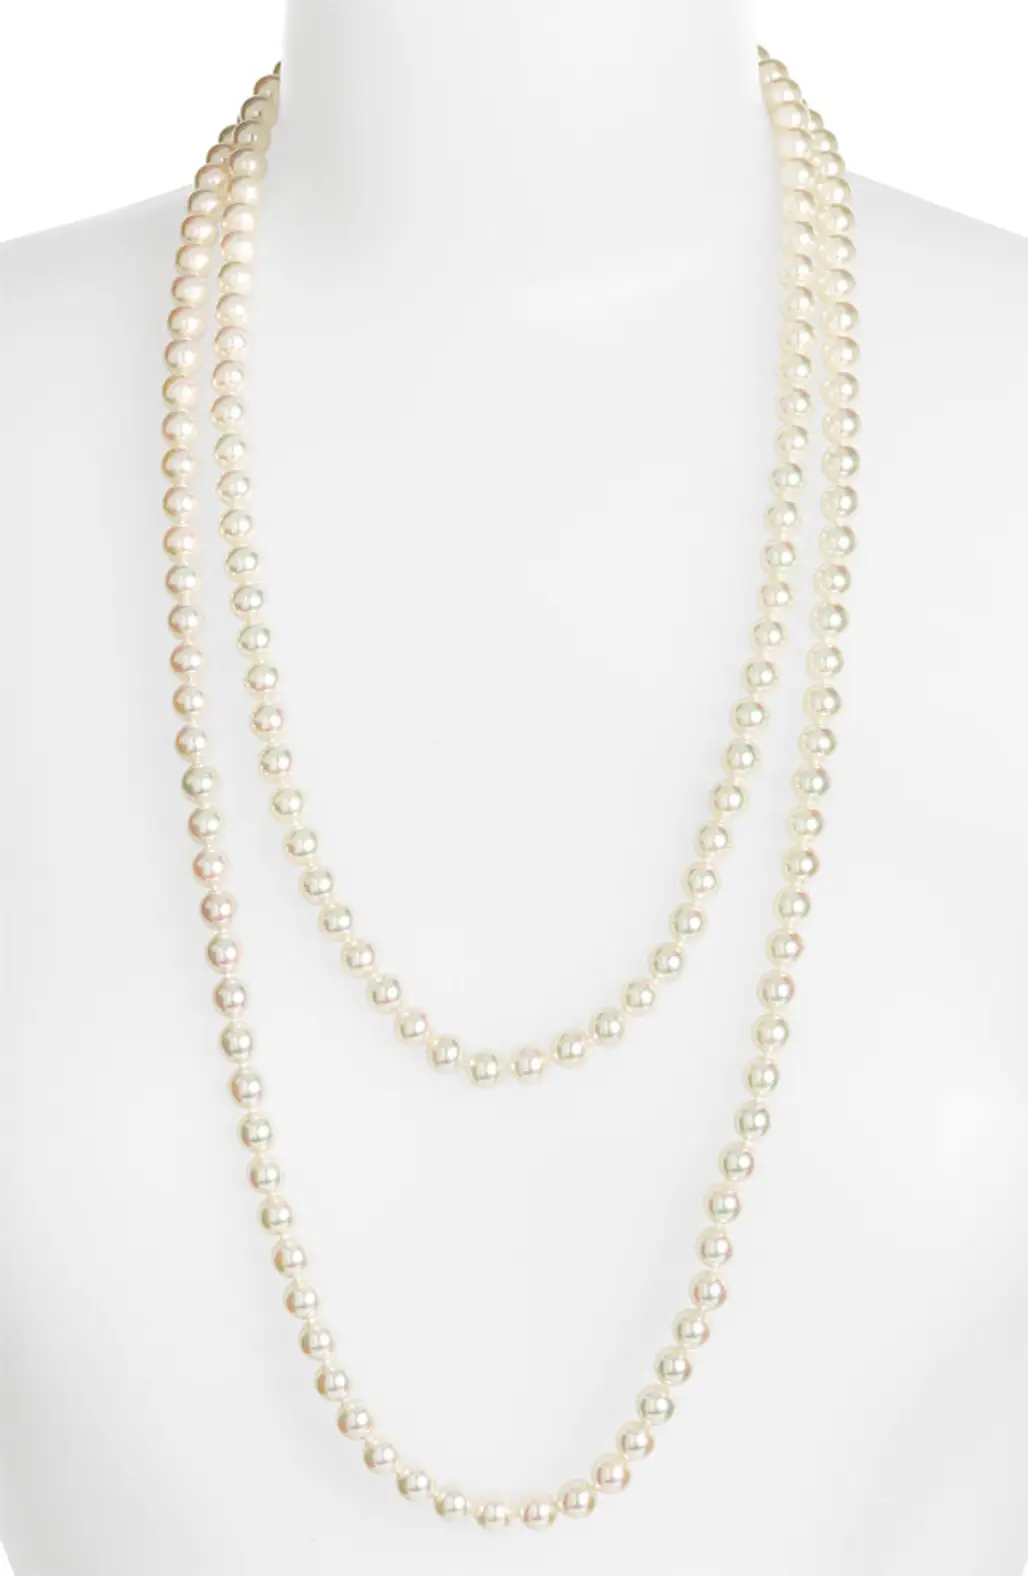 A Bevy of Pretty Pearls